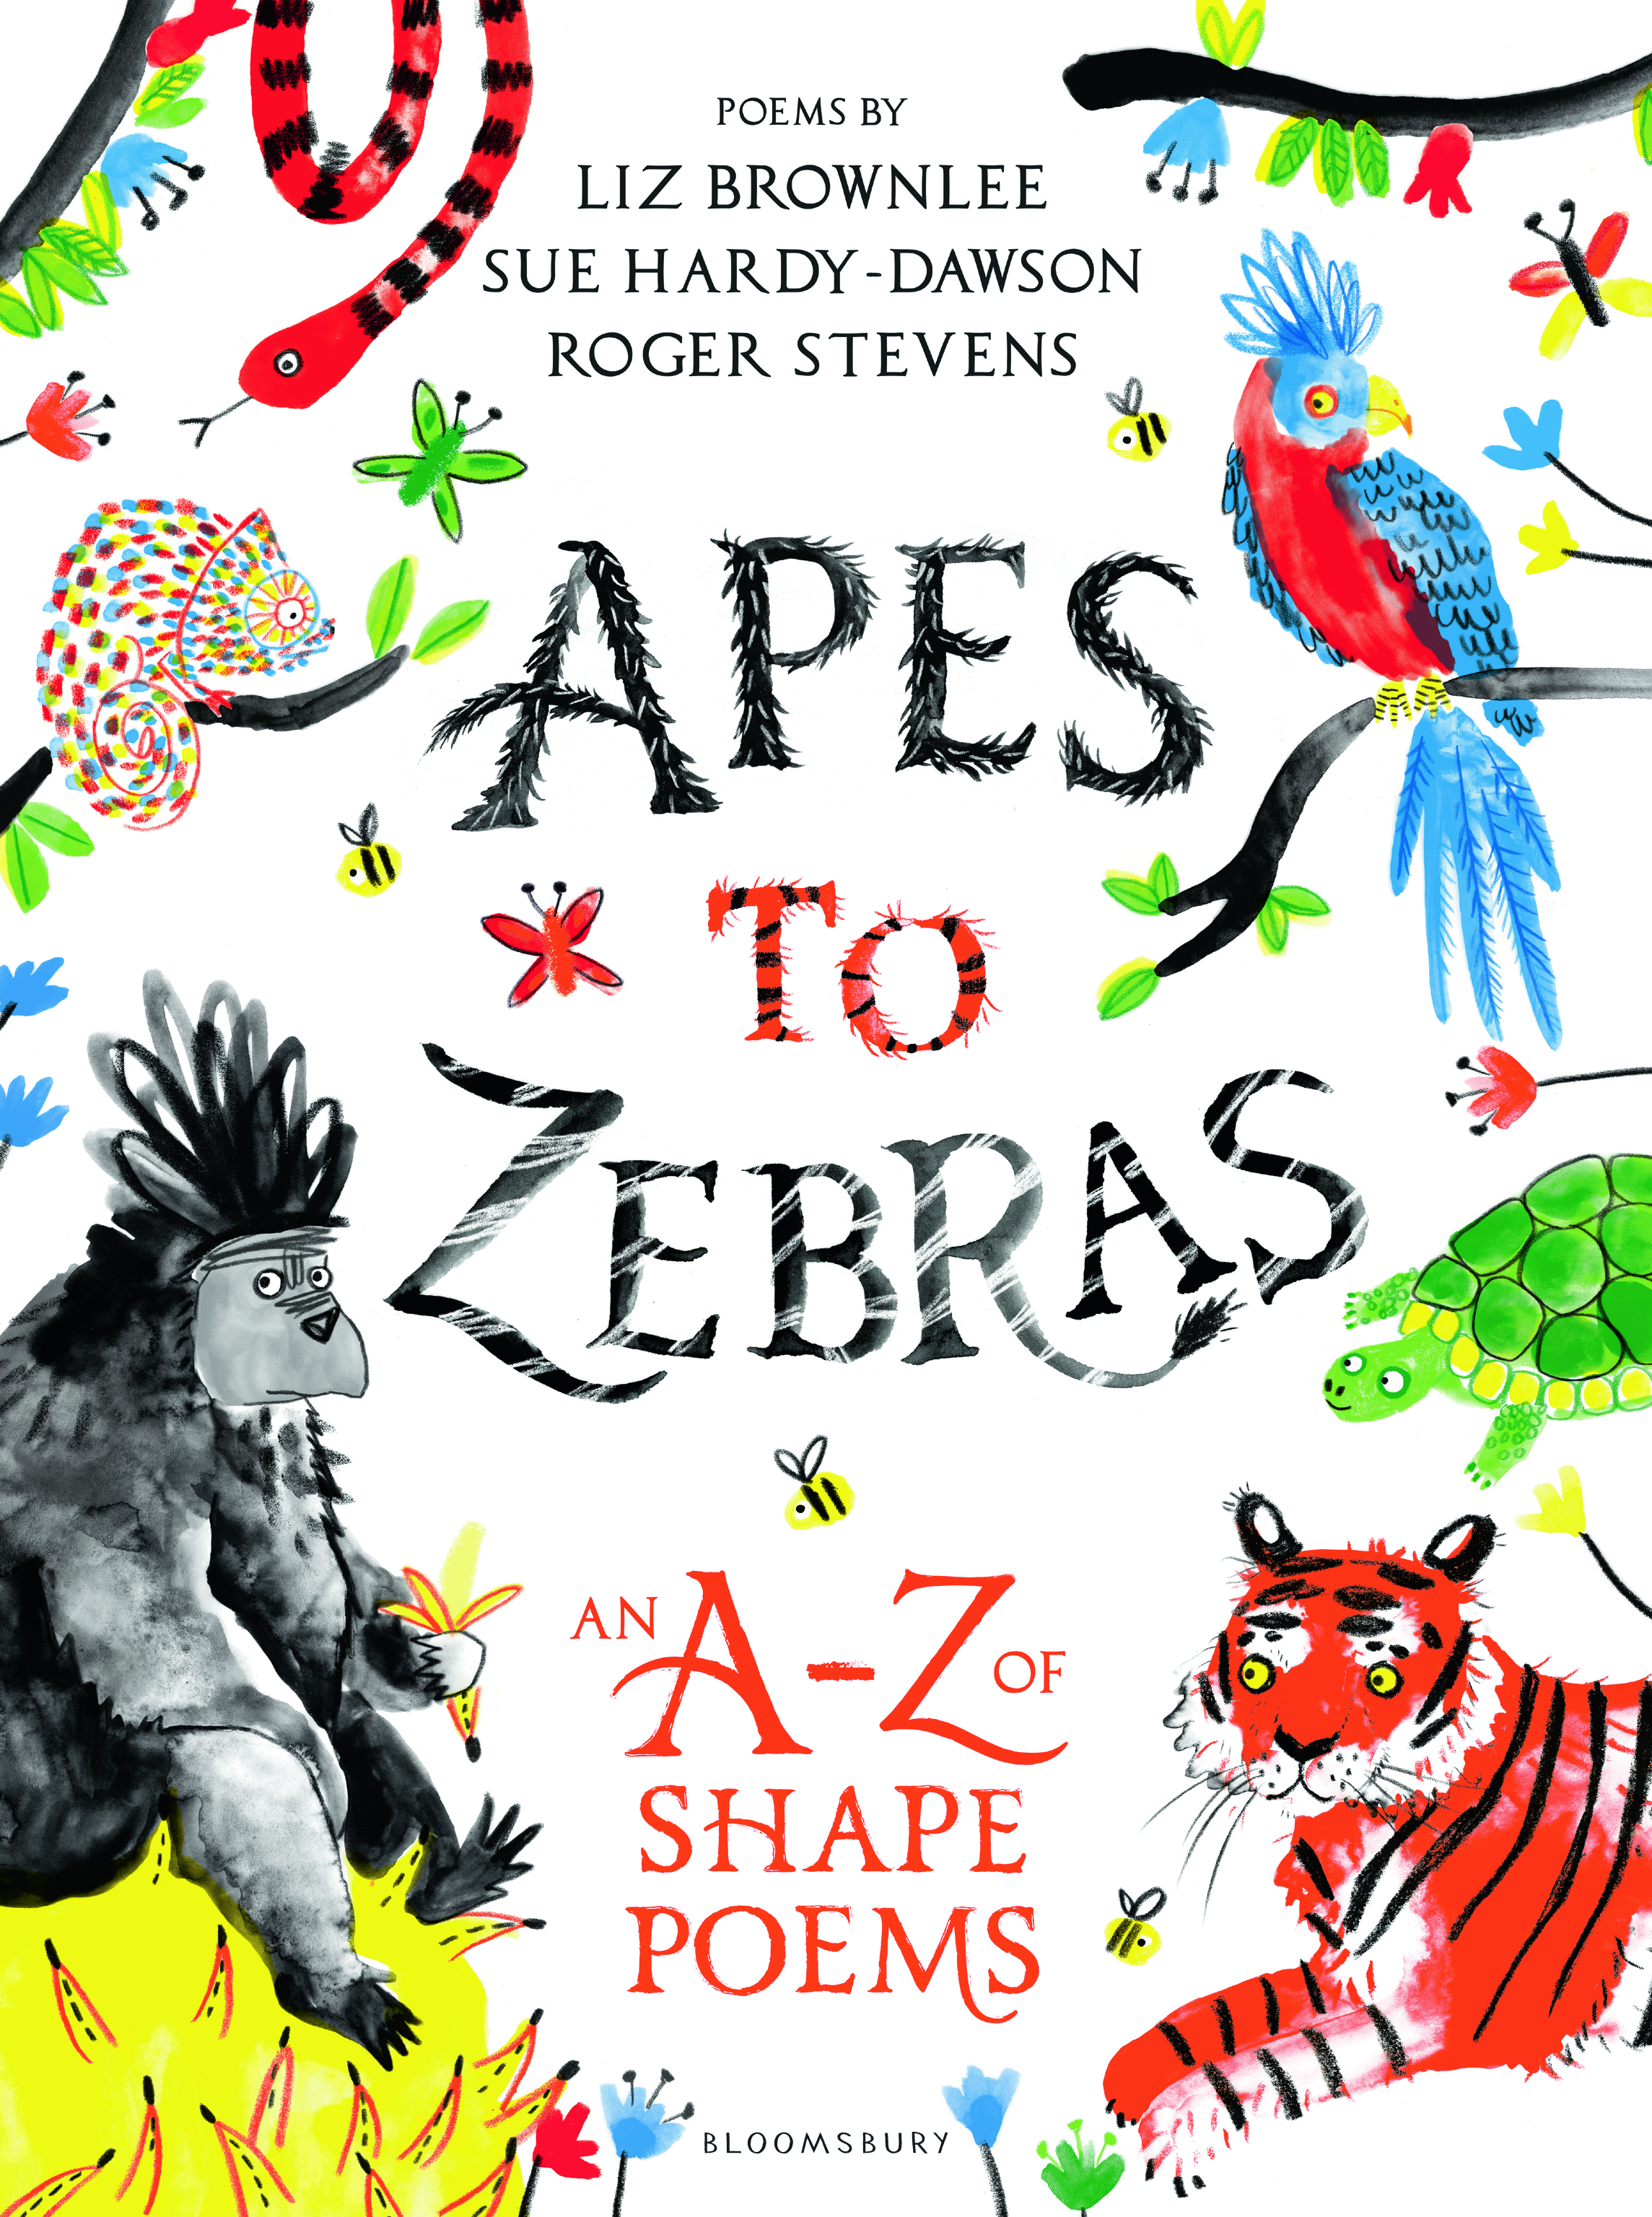 Apes to Zebras, An A-Z of Animal Shape Poems. A extraordinary book full of poems in the shapes of the animals they are about. Great fun and educational.